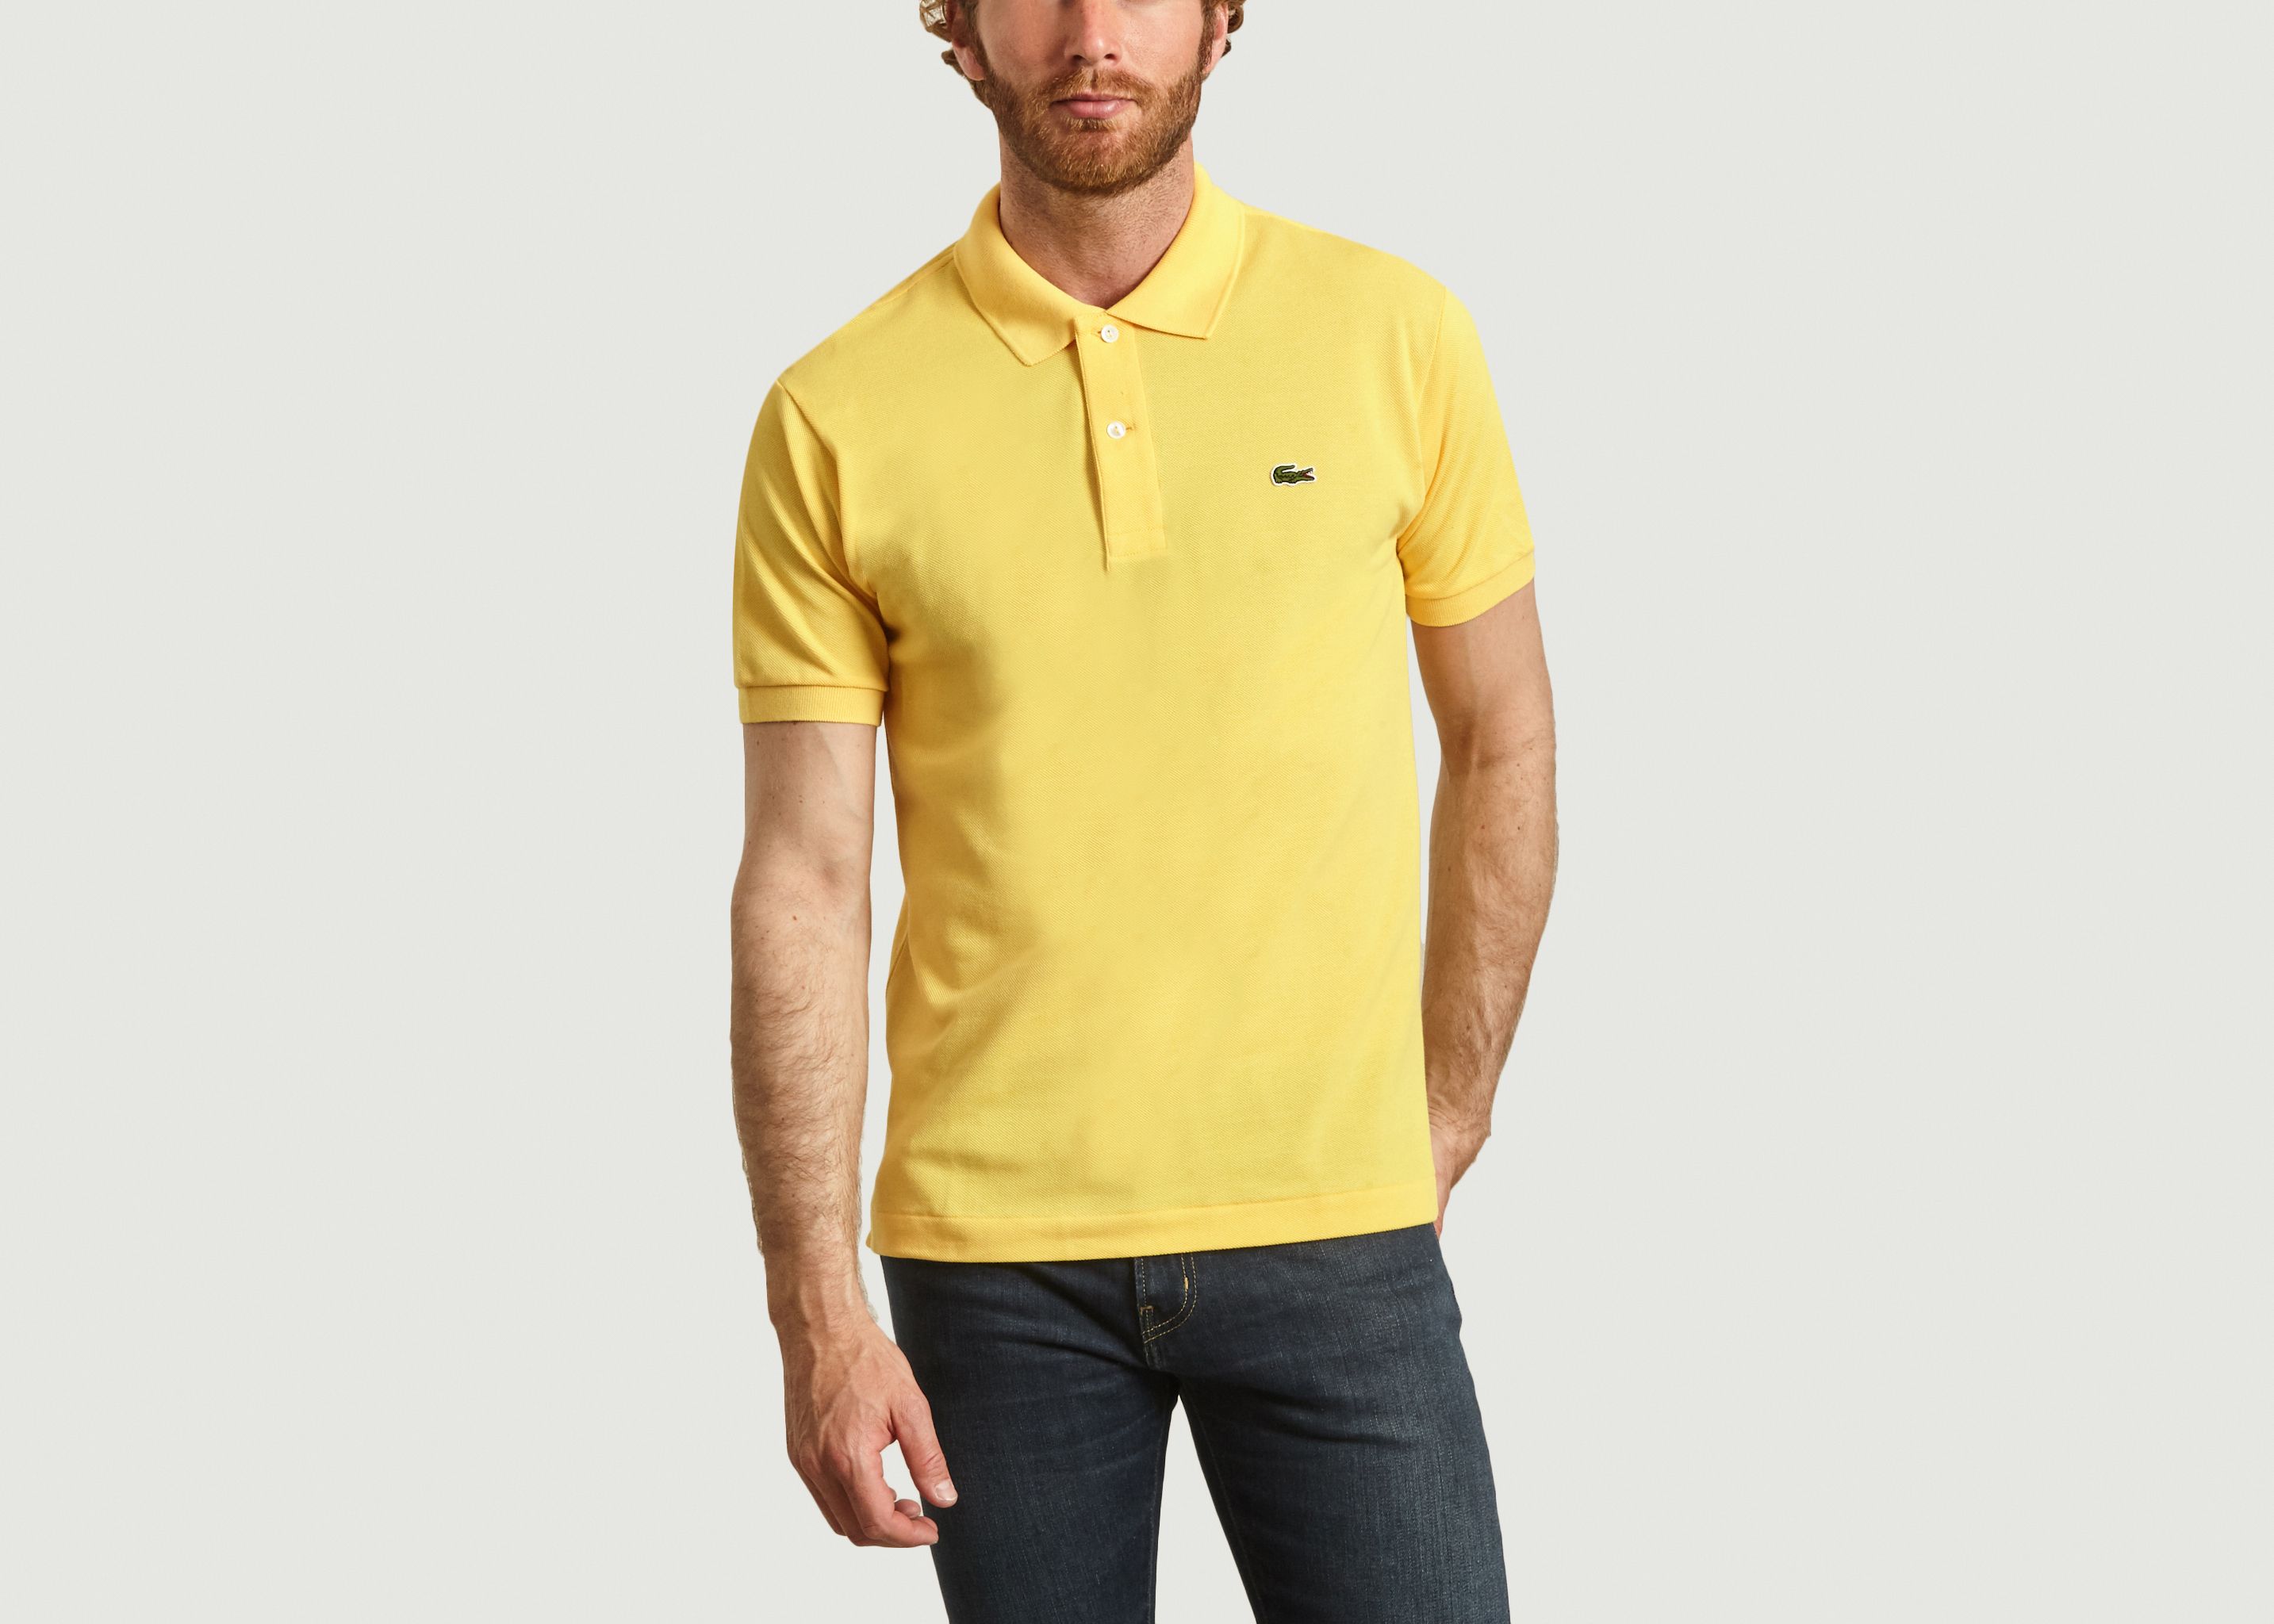 lacoste slim fit polo size guide